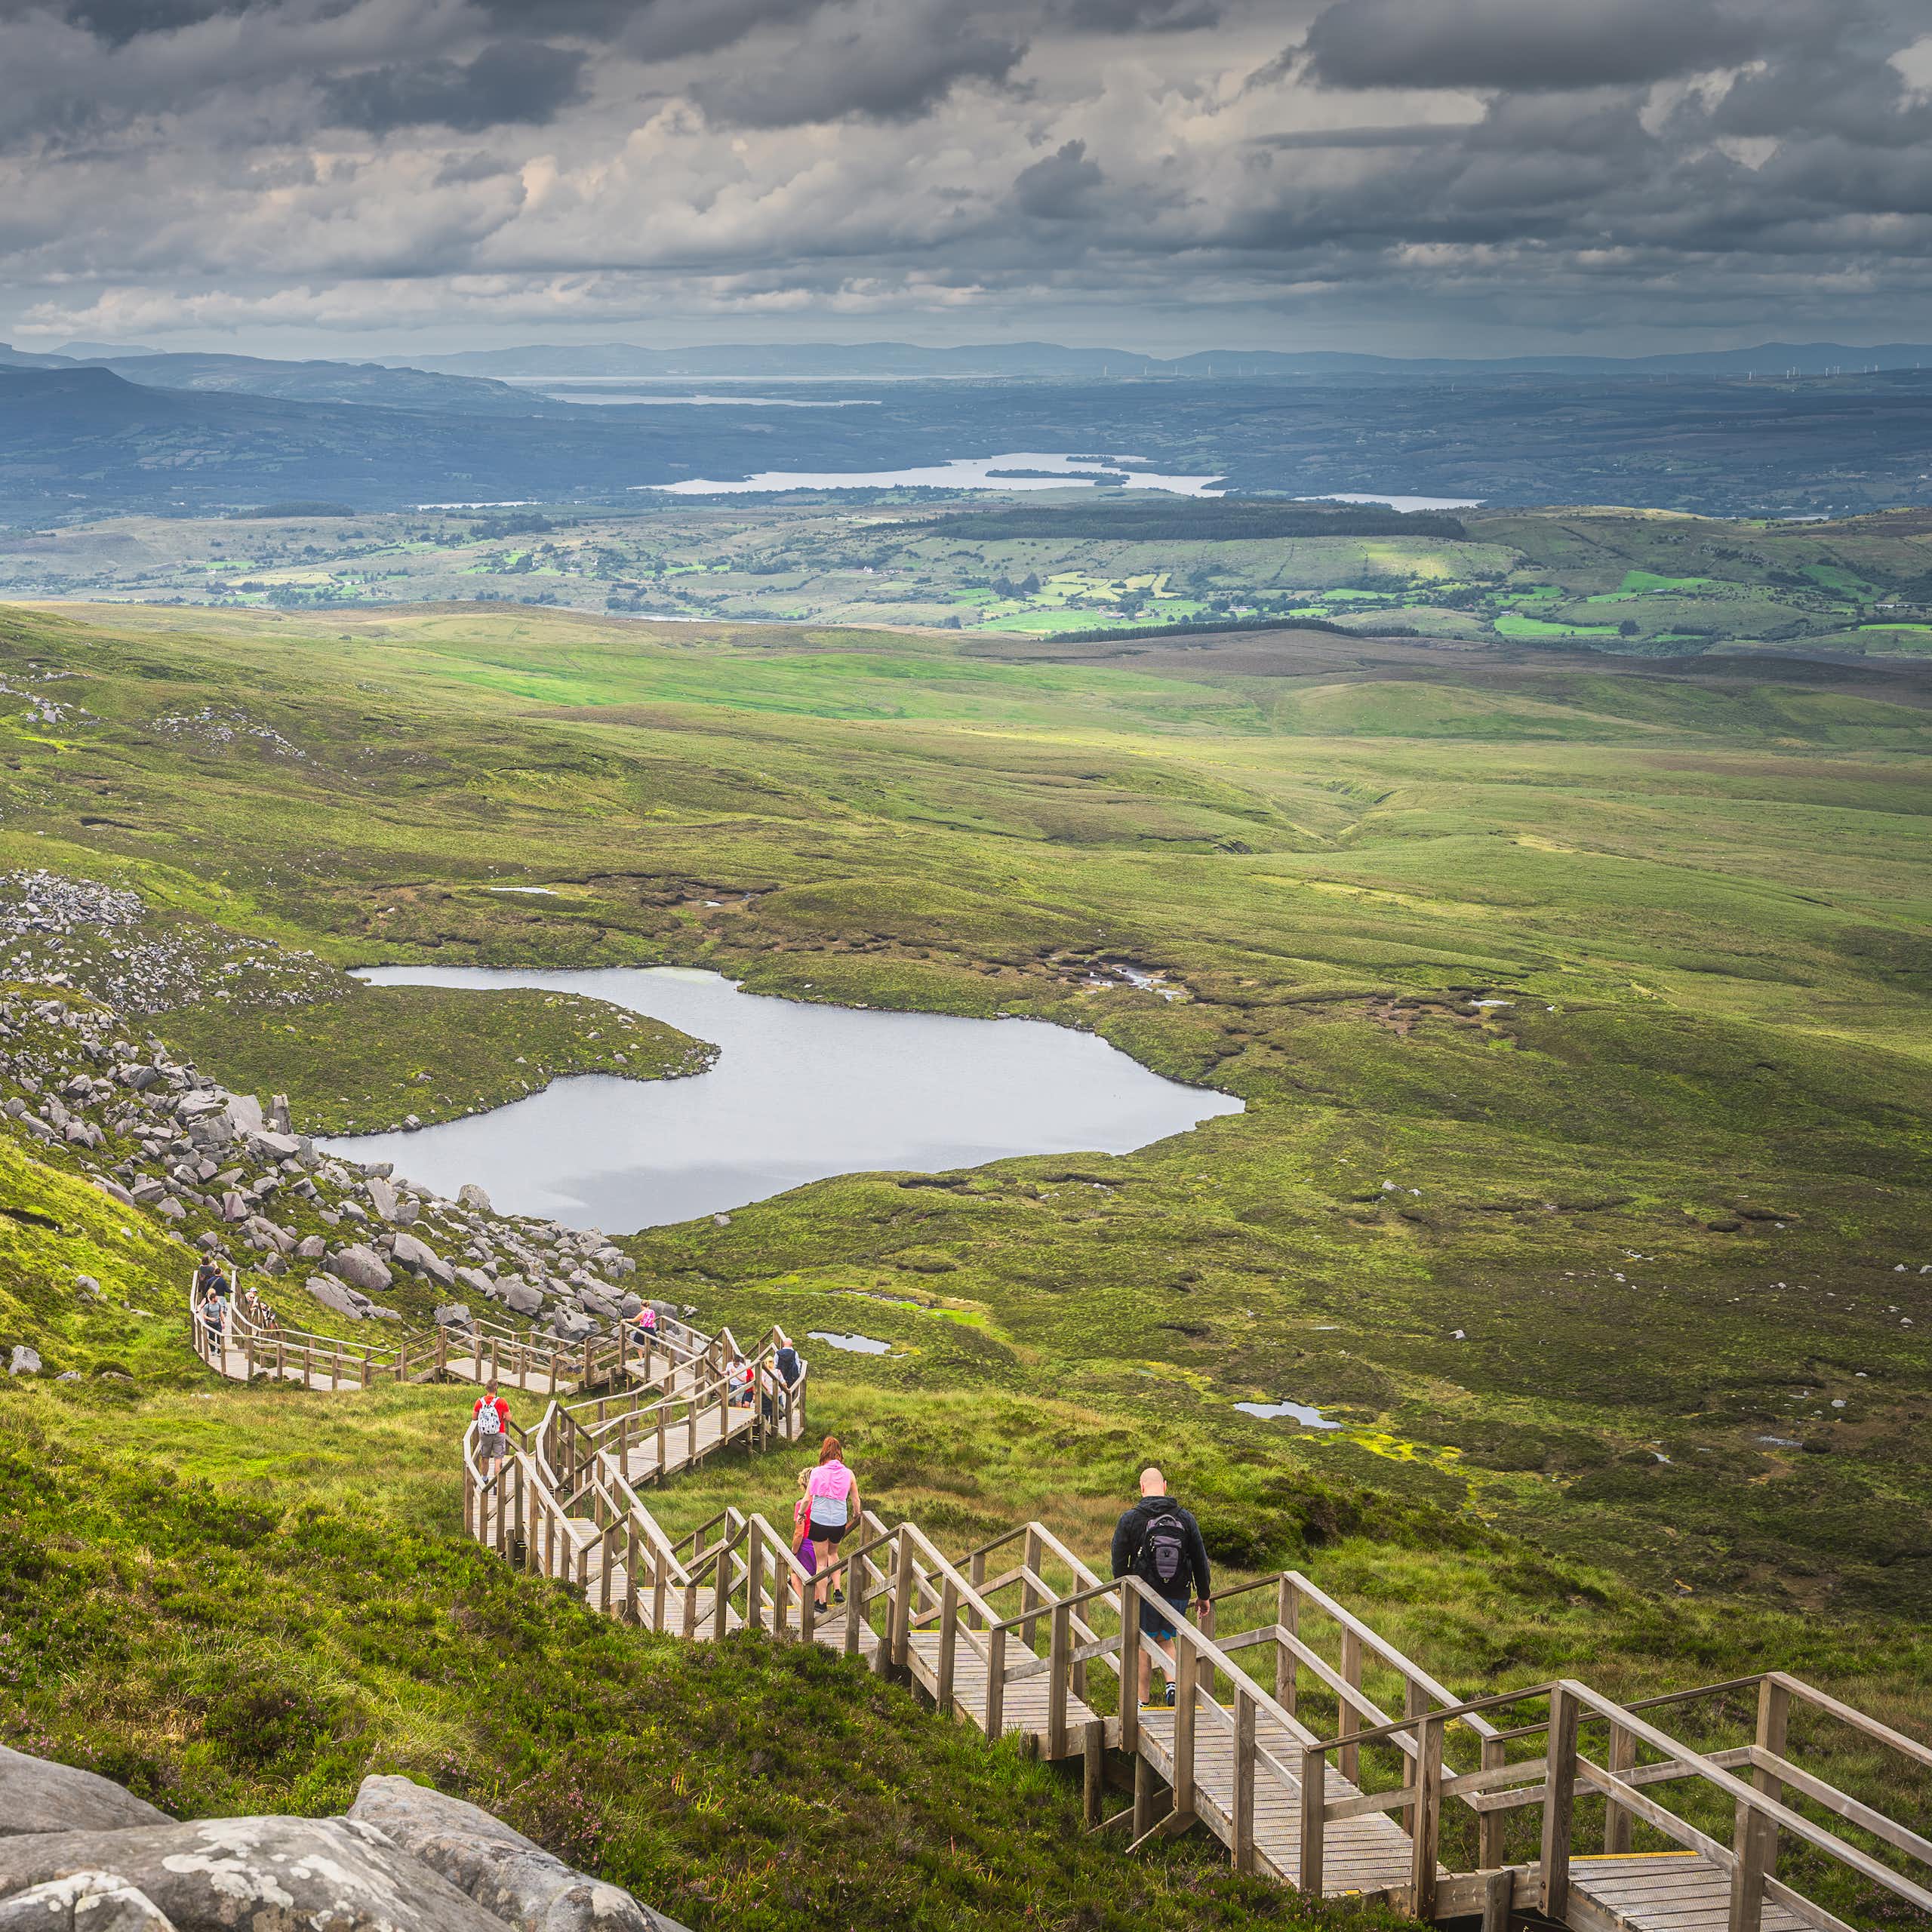 Hikers on the Cuilcagh (Stairway to Heaven) hiking trail in County Fermanagh.